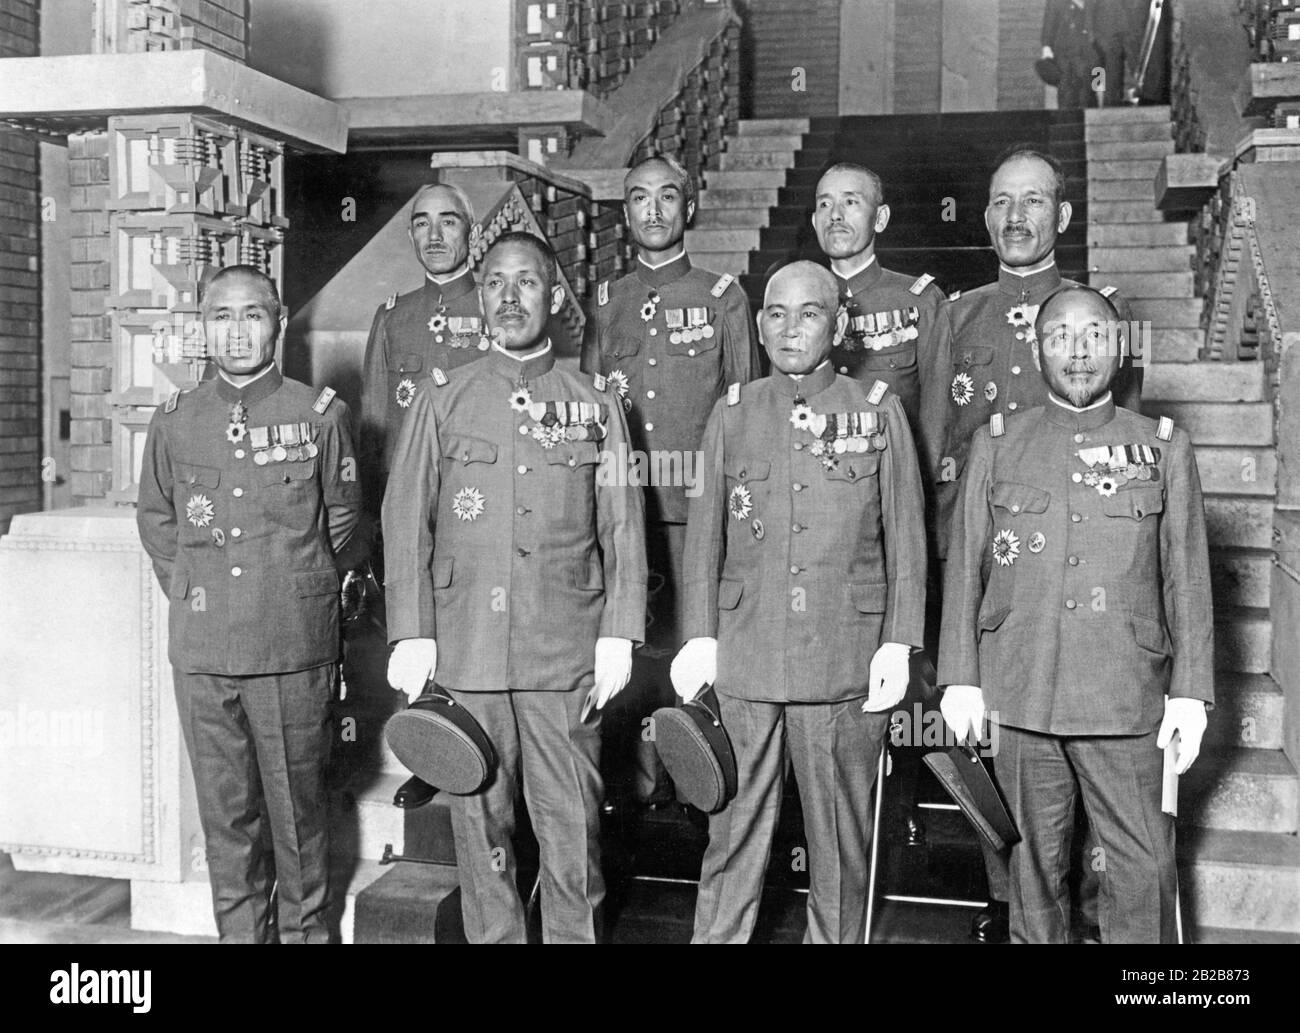 Generals of the Japanese army who were recently appointed as corps commanders. From left, front: generals Satoh, Mazaki, Ogata and Honjo. Second row from left: generals Sakahmoto, Hirose, Nishi and Hayashi. (Undated picture, ca. 1930s) Stock Photo